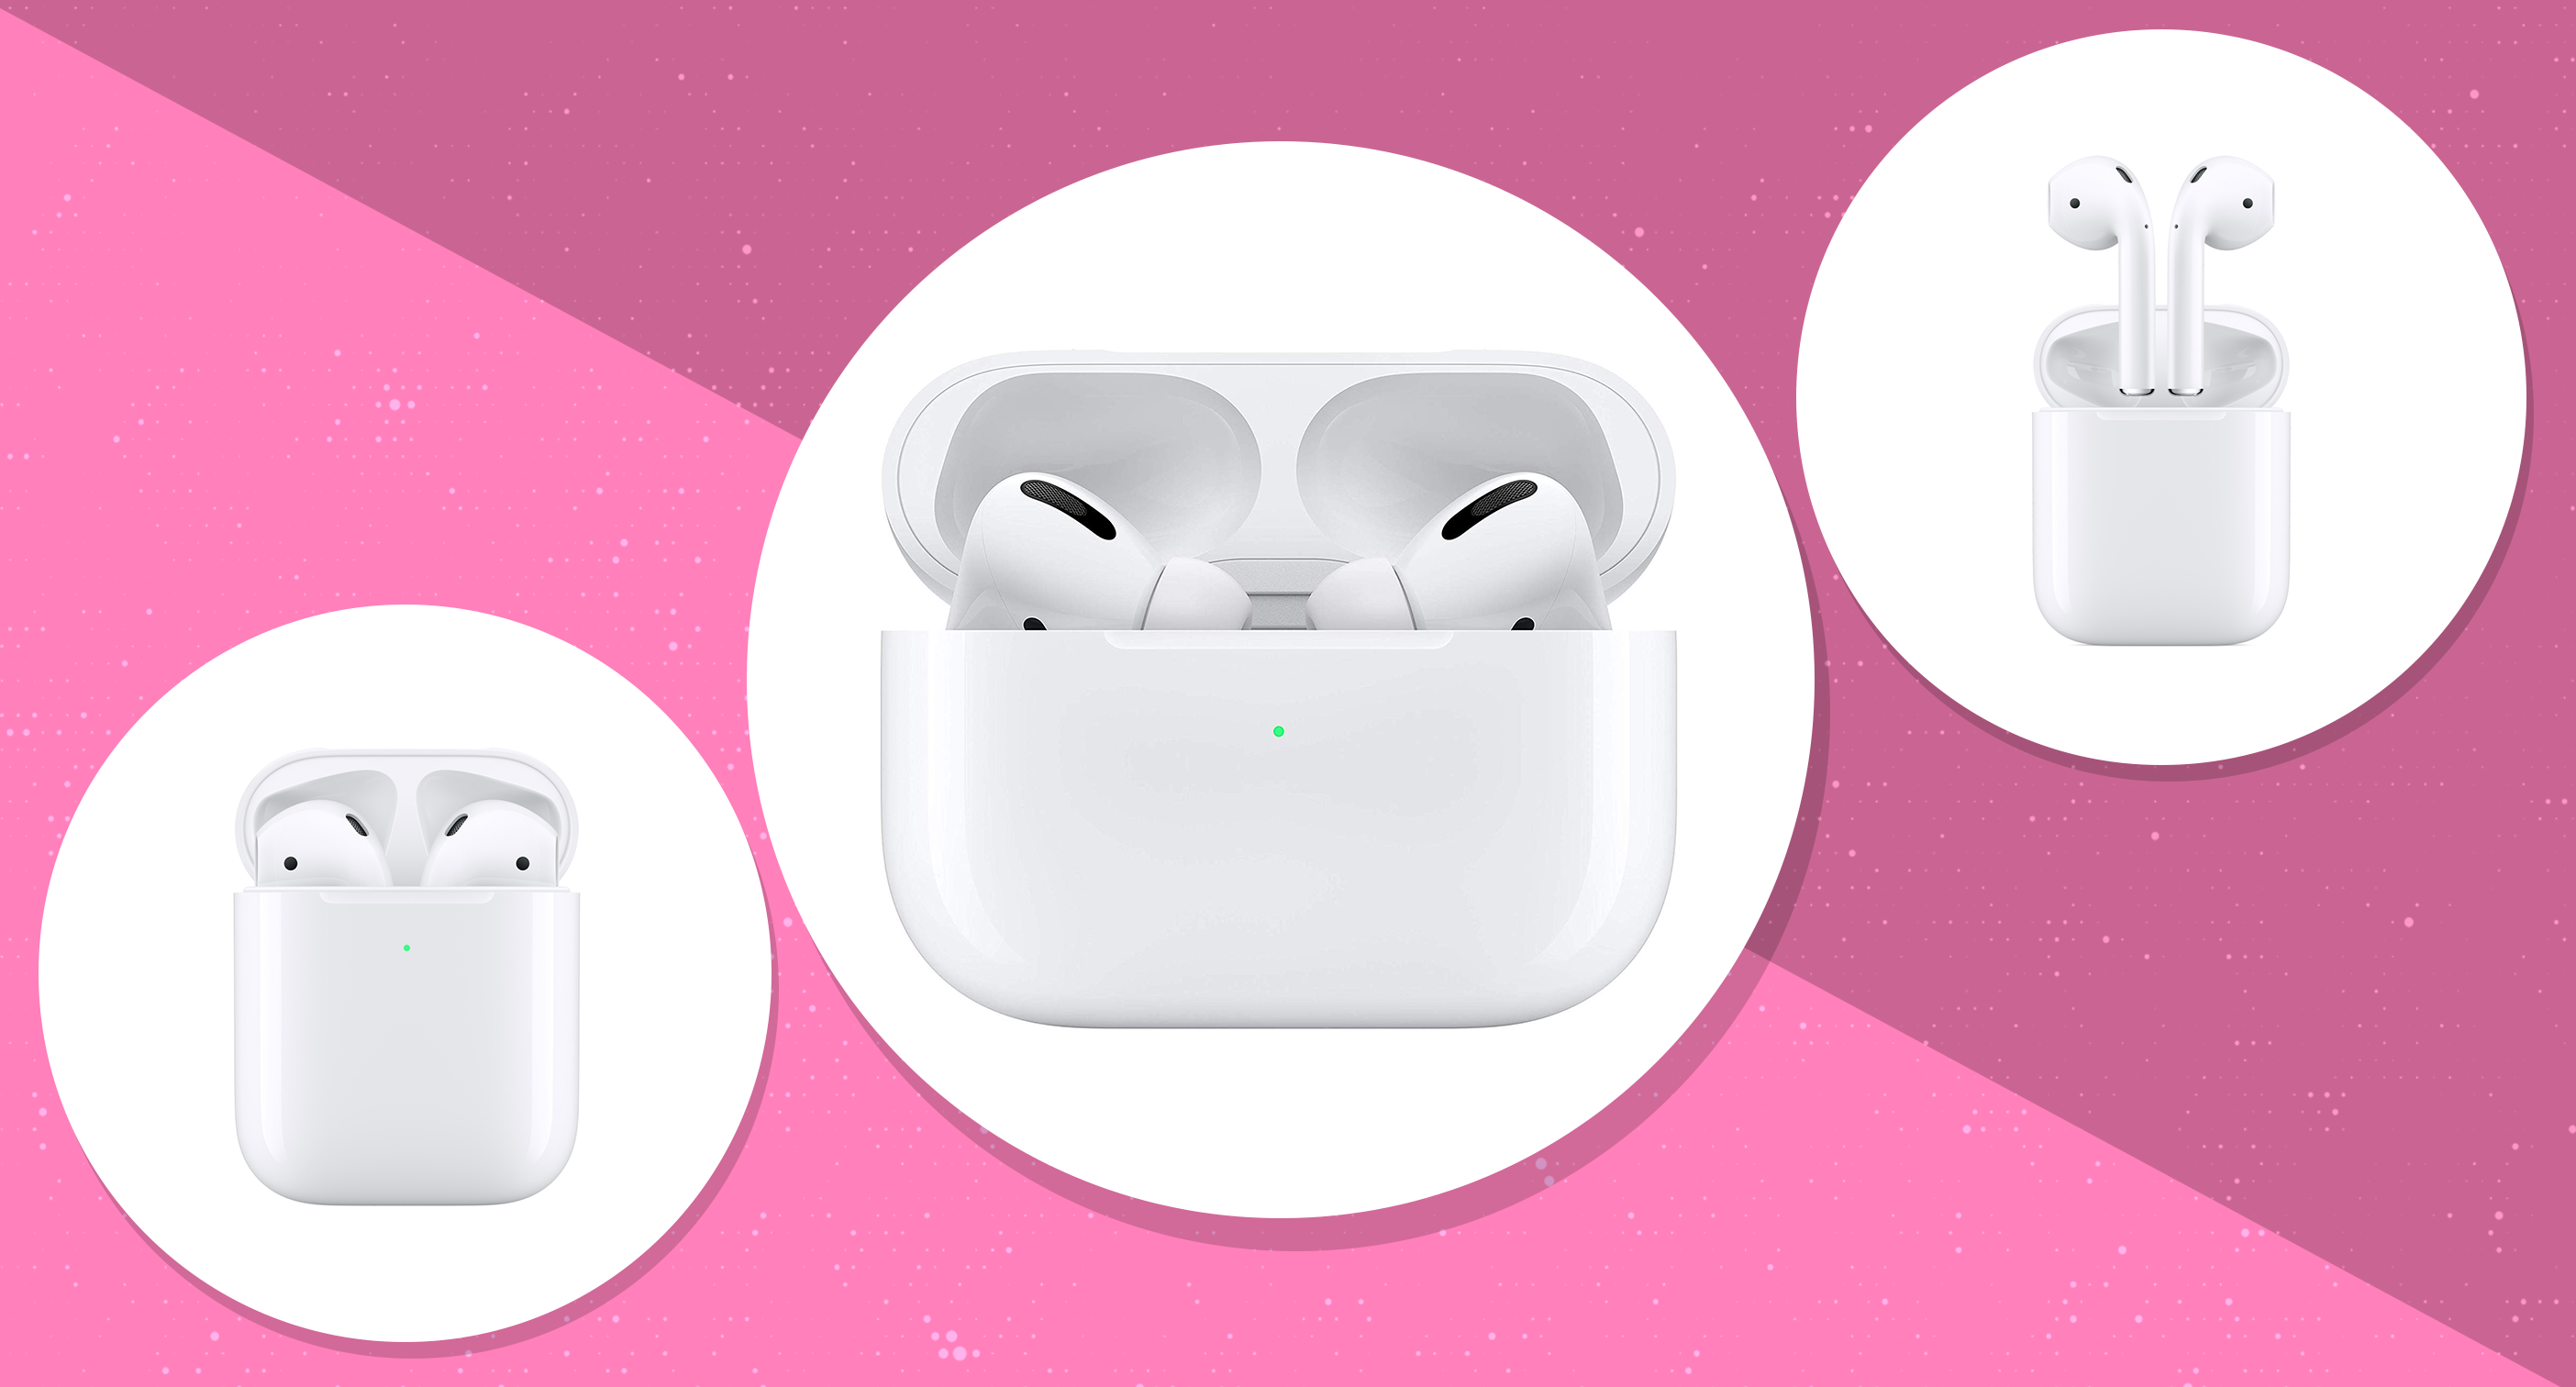 Apple Airpods and AirPods Pro are on sale for Black Friday